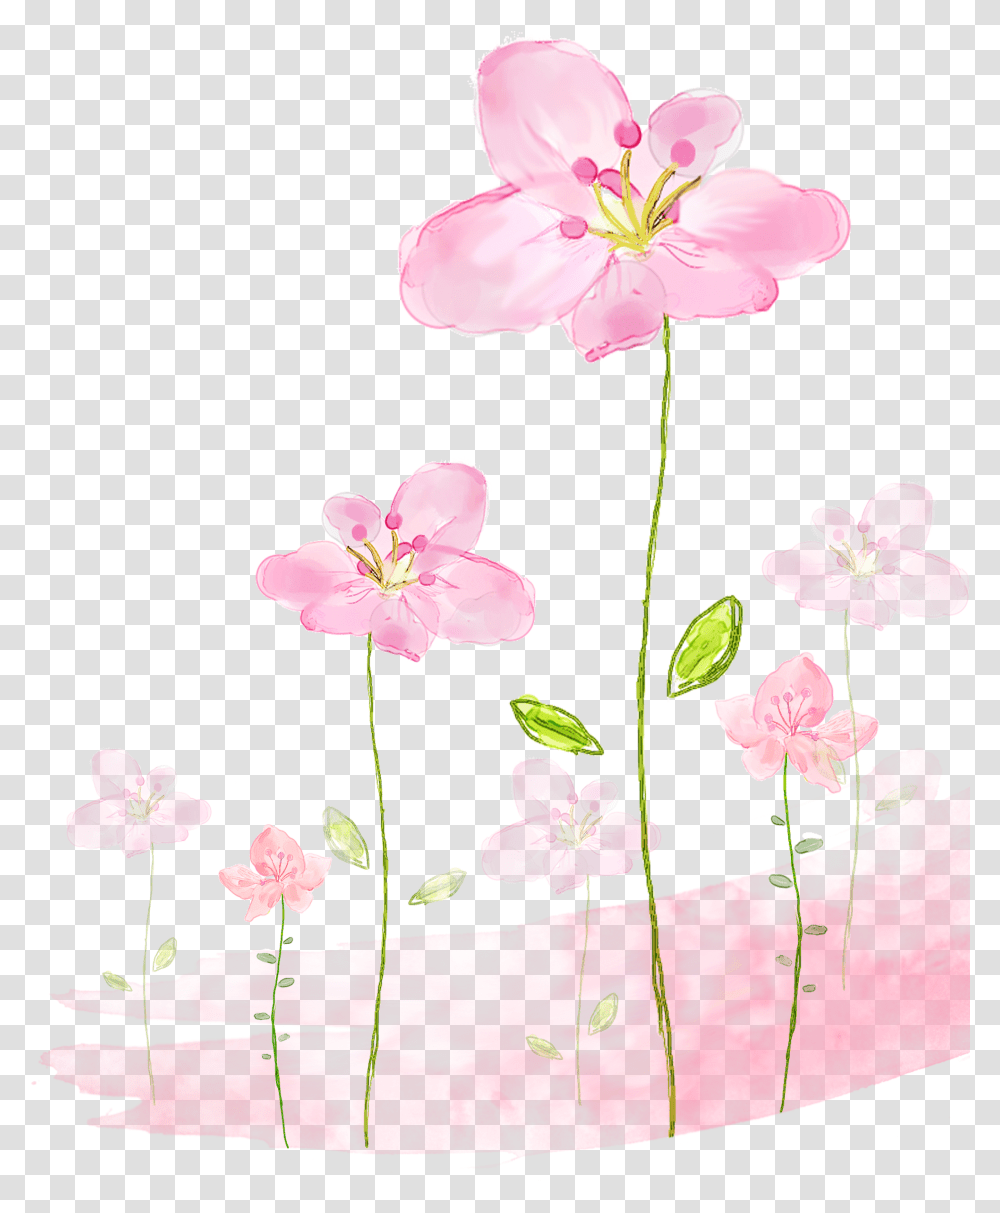 Pink Flowers Background Download Flower Background Mint, Plant, Blossom, Cherry Blossom, Anther Transparent Png